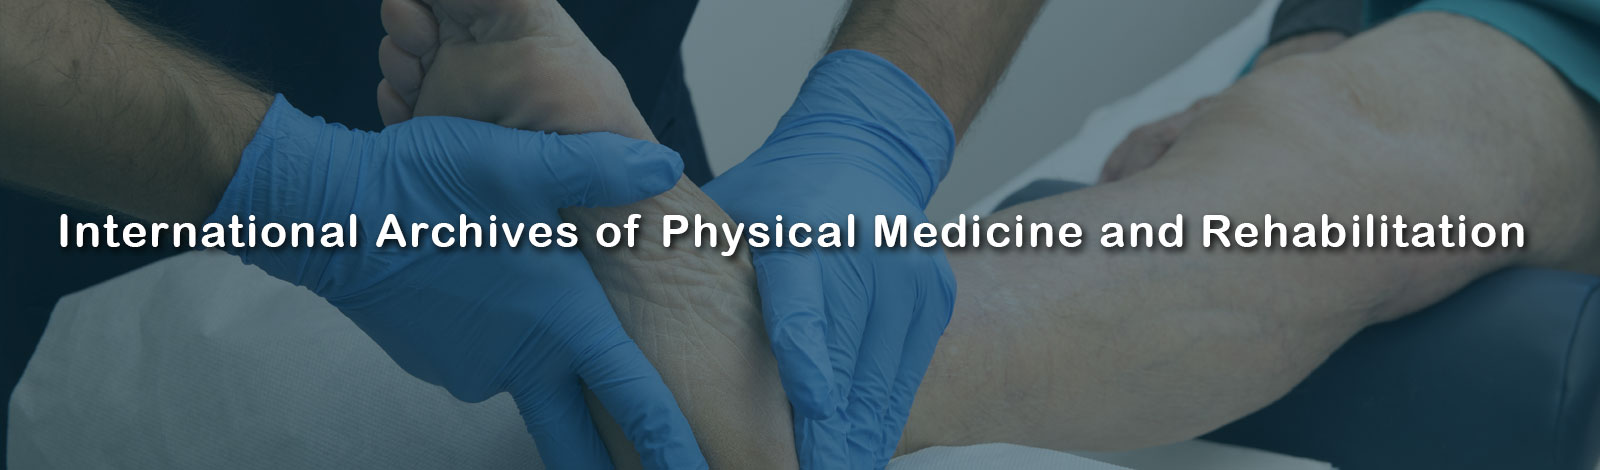 International Archives of Physical Medicine and Rehabilitation